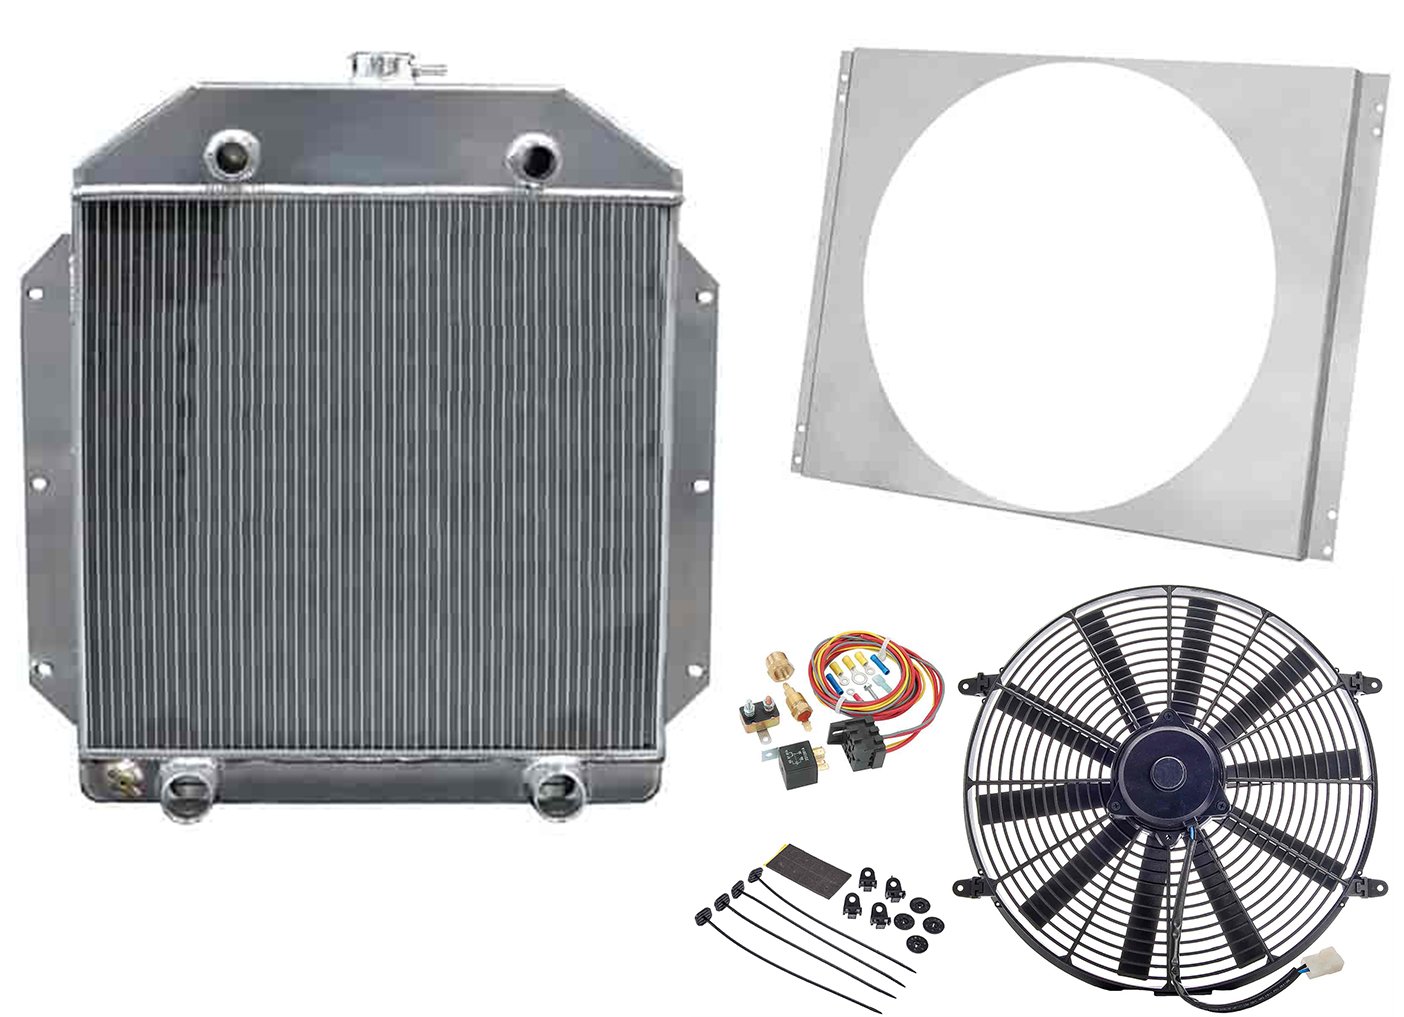 All-Aluminum Radiator System Kit 1949-1953 Ford Car with Flathead Configuration